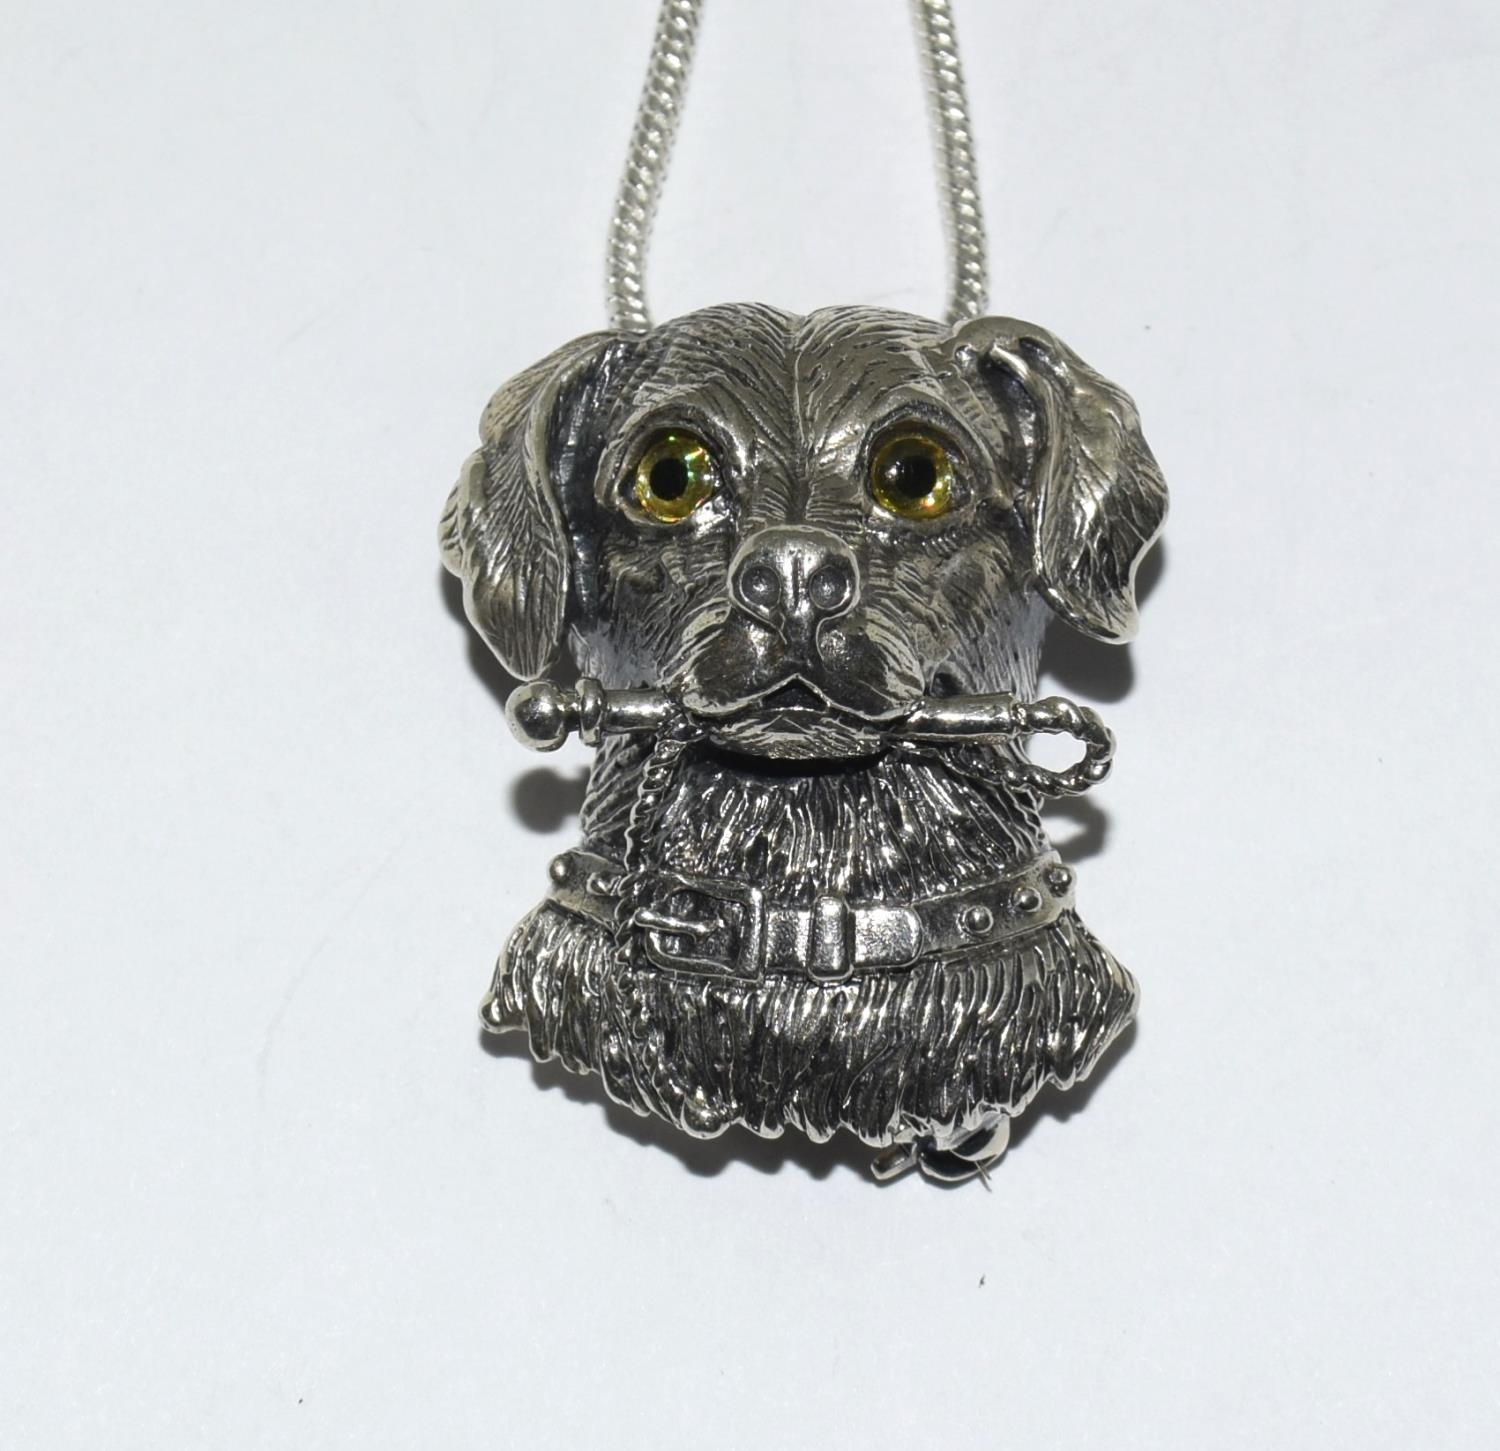 Silver dogs head necklace / brooch with glass eyes. - Image 2 of 4